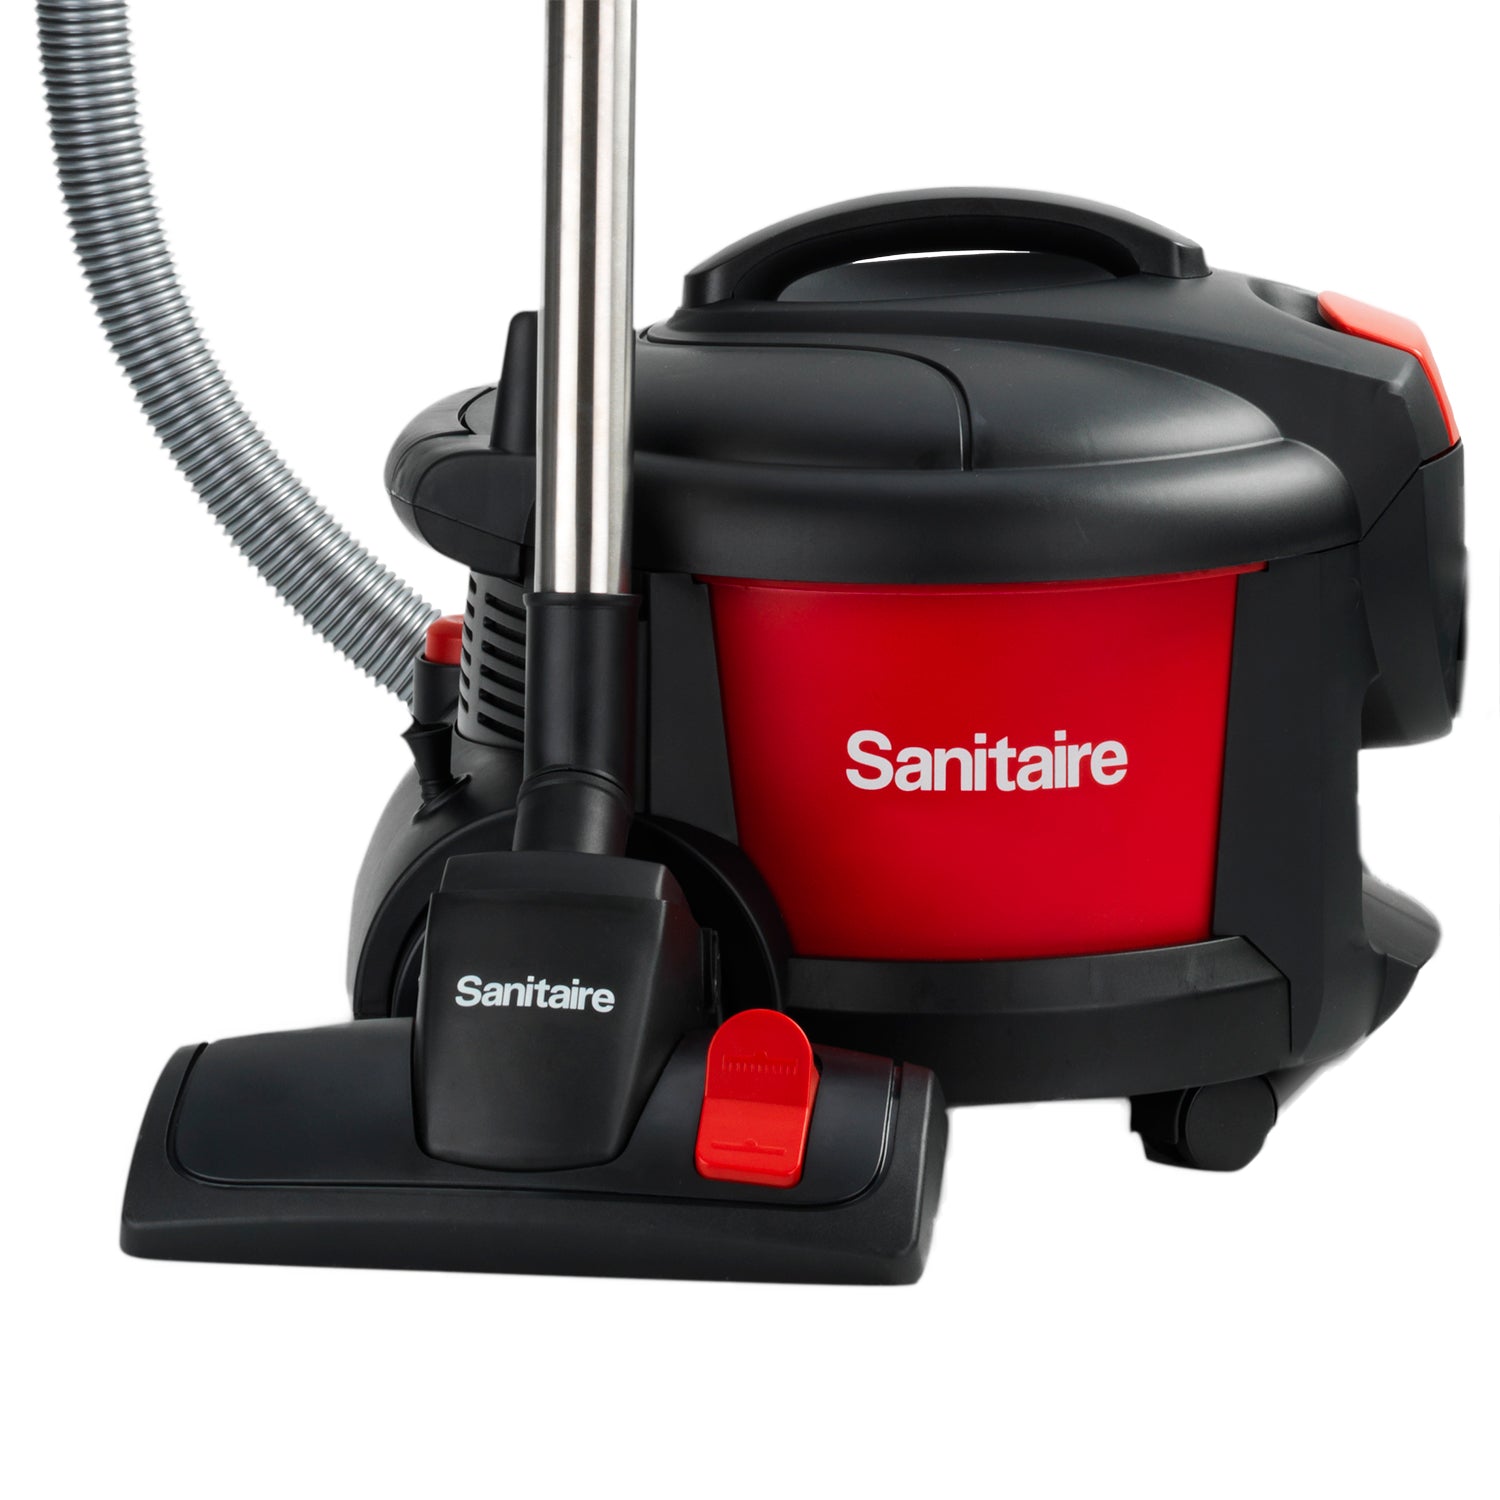 Maximize Home Cleaning Efficiency with Versatile Vacuum Cleaner